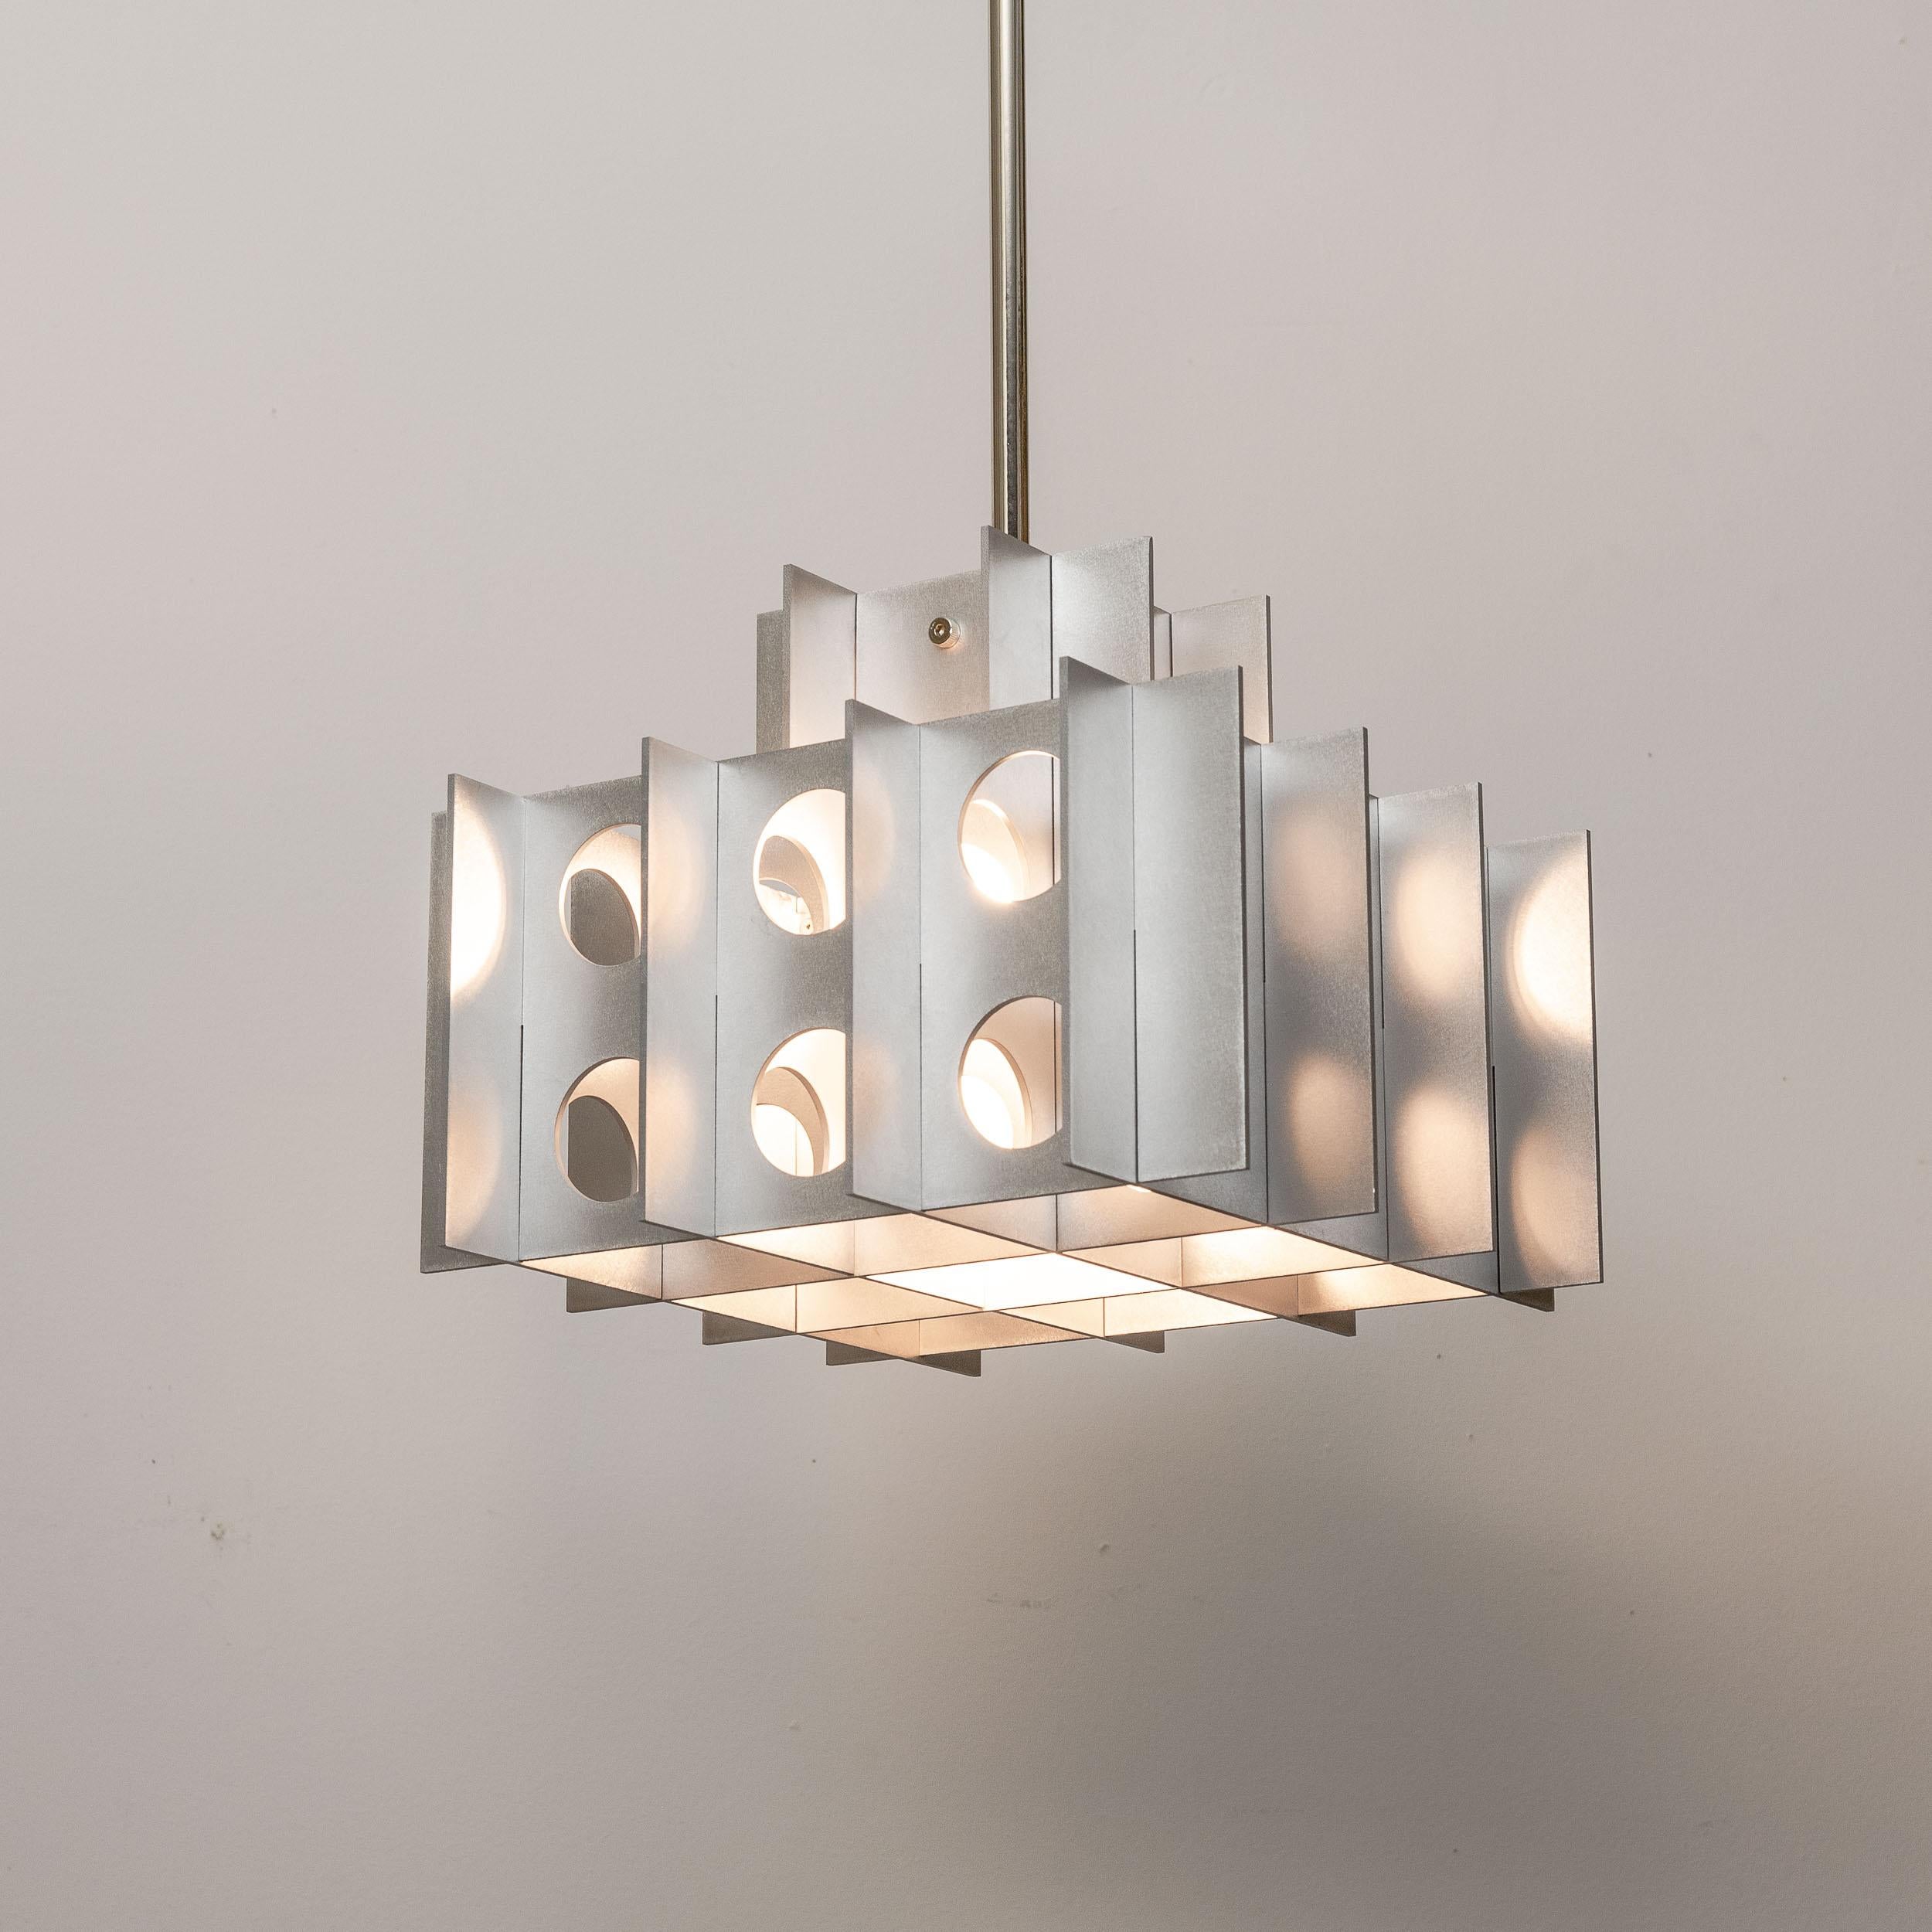 Tenfold Pendant 3TA 24inch, Waxed Aluminum, Geometric, Brutalist Ceiling Light In New Condition For Sale In Brooklyn, NY